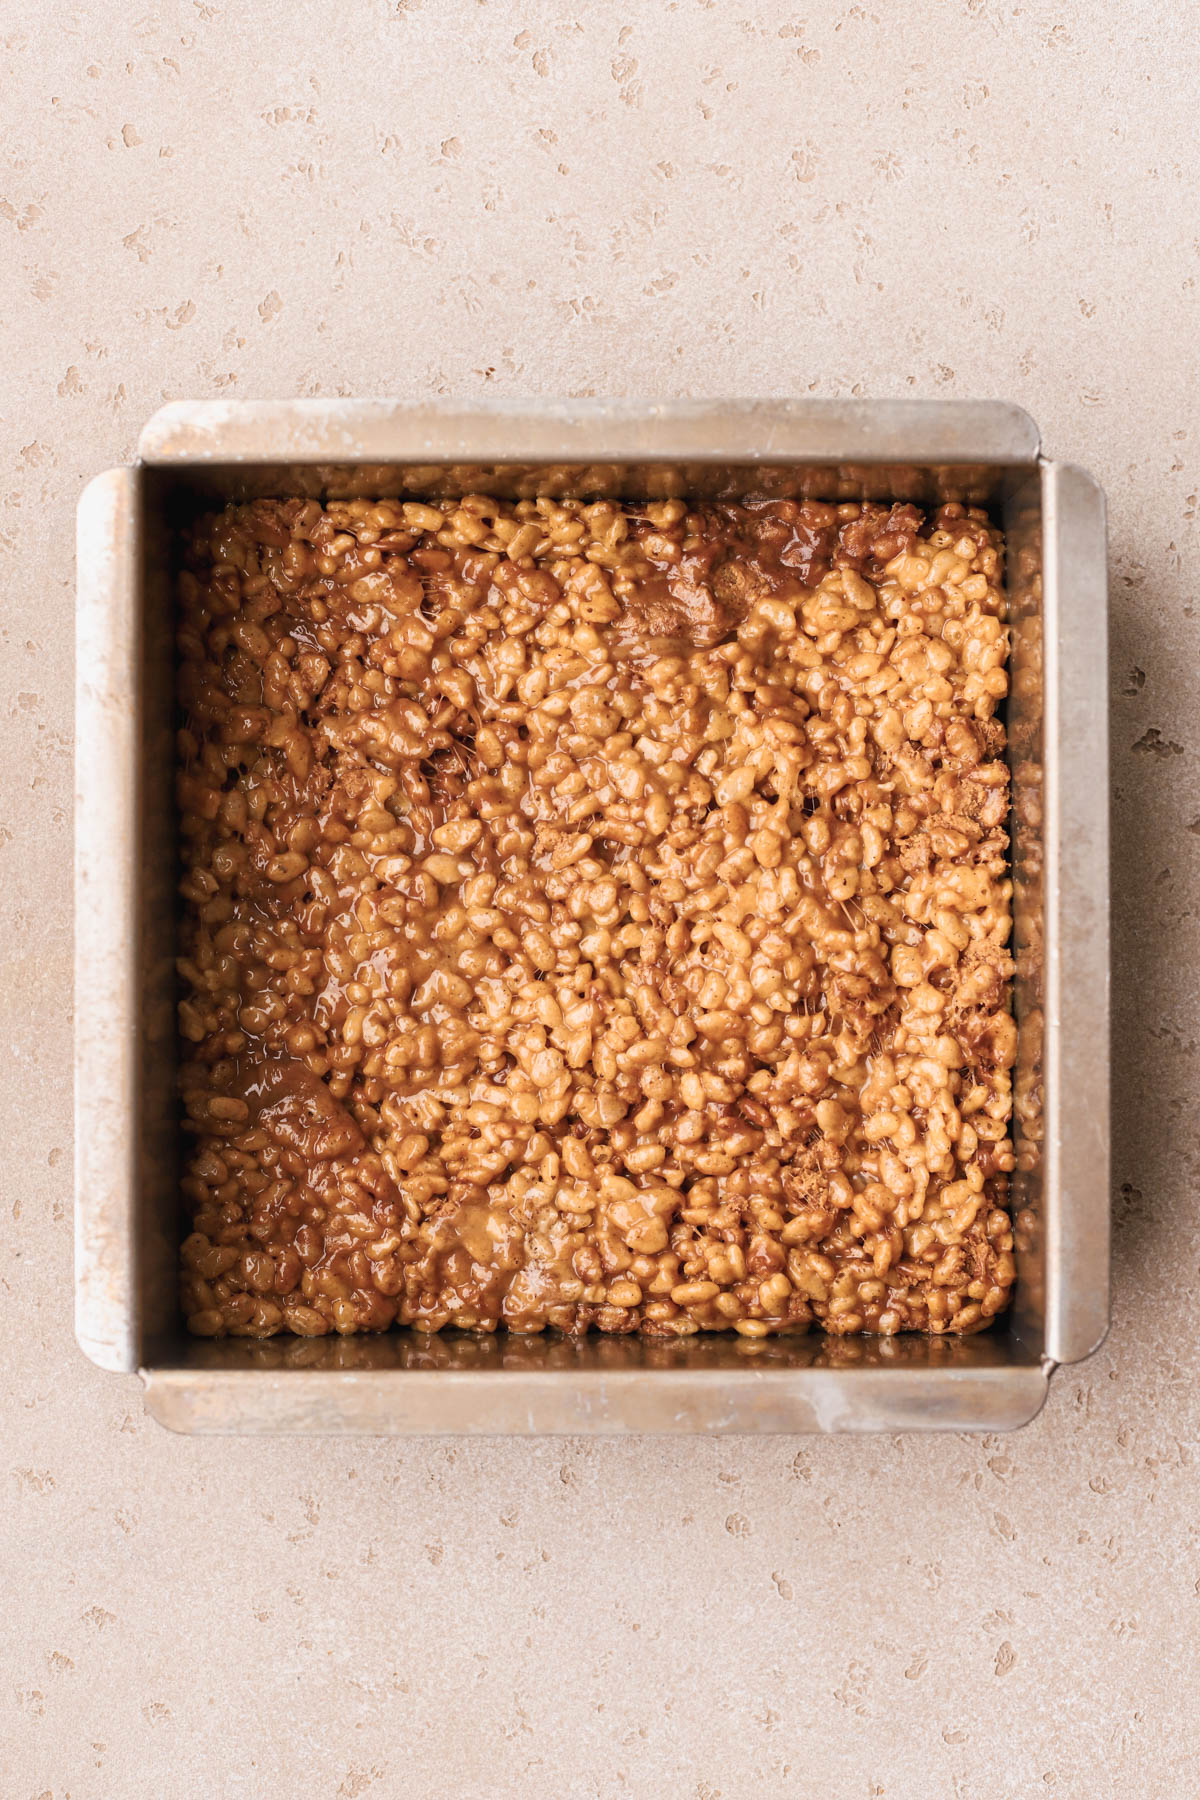 Peanut butter Rice Krispies with Reese's peanut butter cups inside baking pan. 